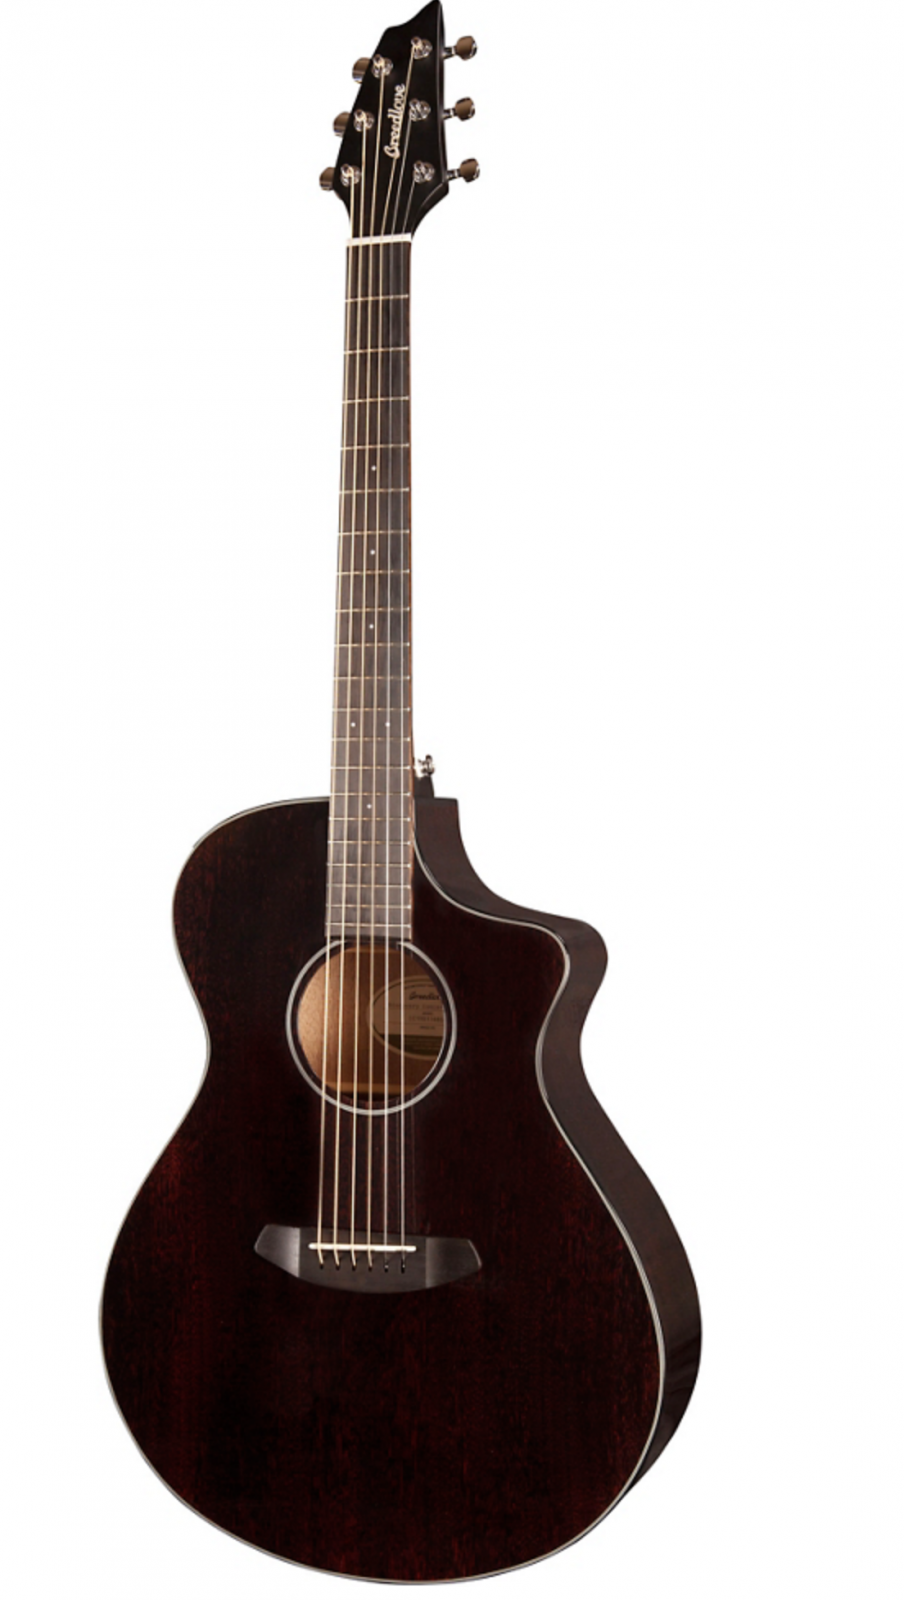 Breedlove Discovery Concert CE Acoustic Electric Guitar - Black Widow